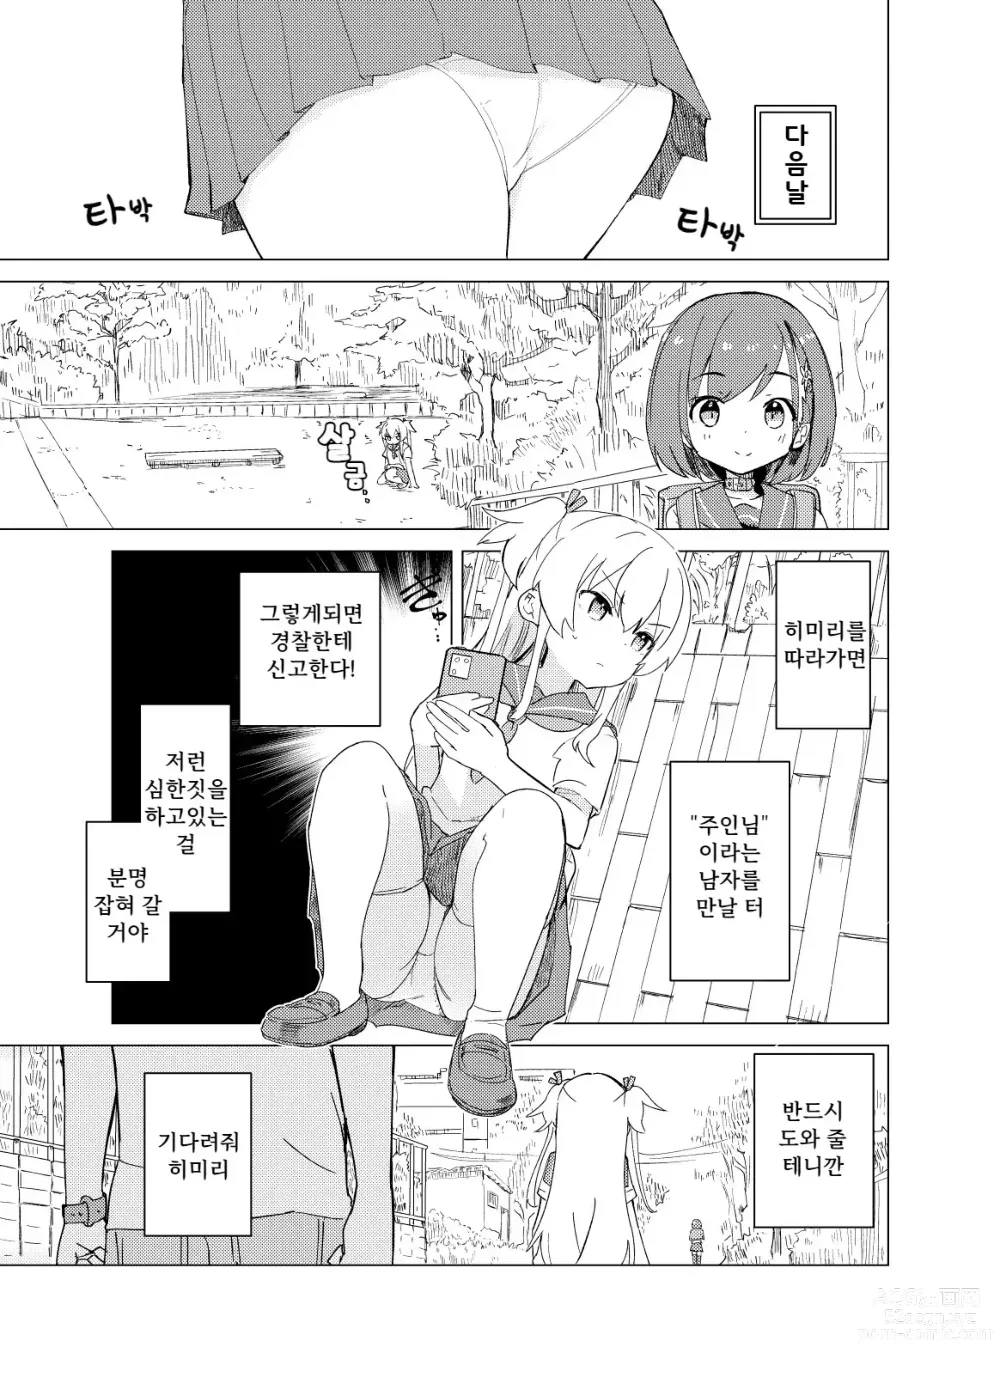 Page 12 of doujinshi S.S.S.Di part 1